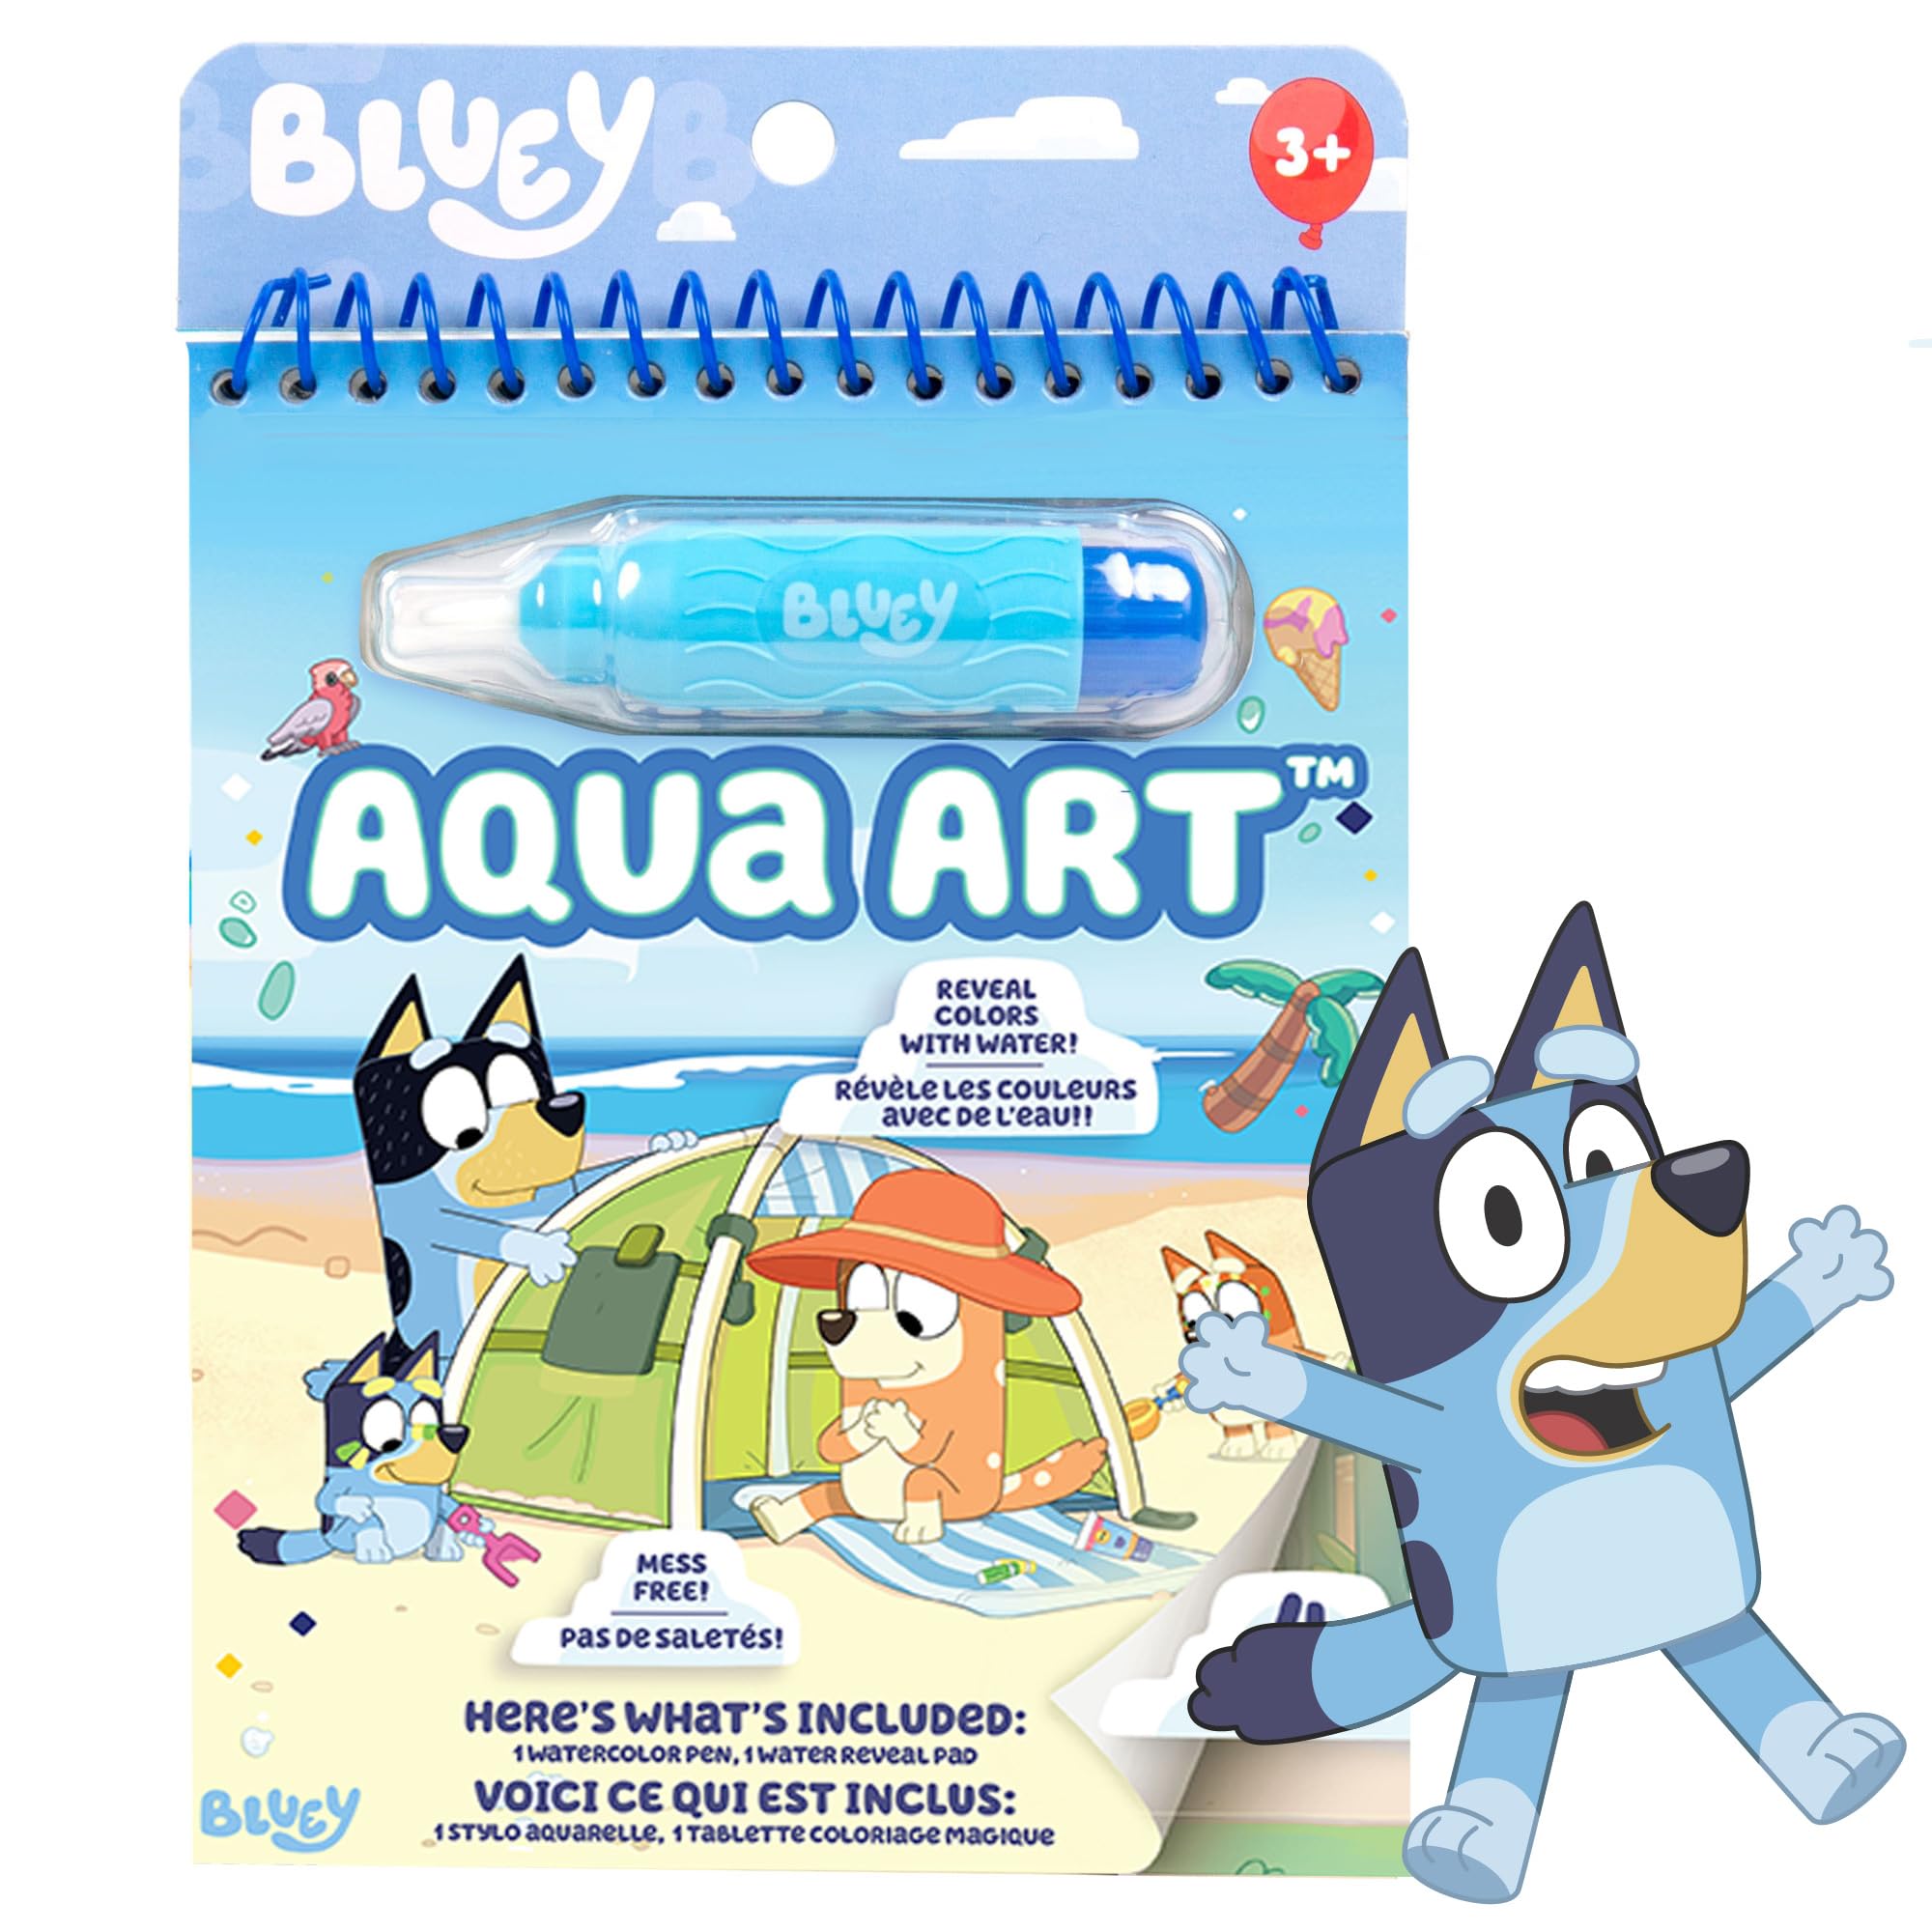 Bluey Aqua Art, Includes 4 Reusable Pages of Water Art & Water Pen, Color with Water Book, Water Reveal Activity Book, Paint with Water Books, Water Doodle Book, Reusable No-Mess Art Book